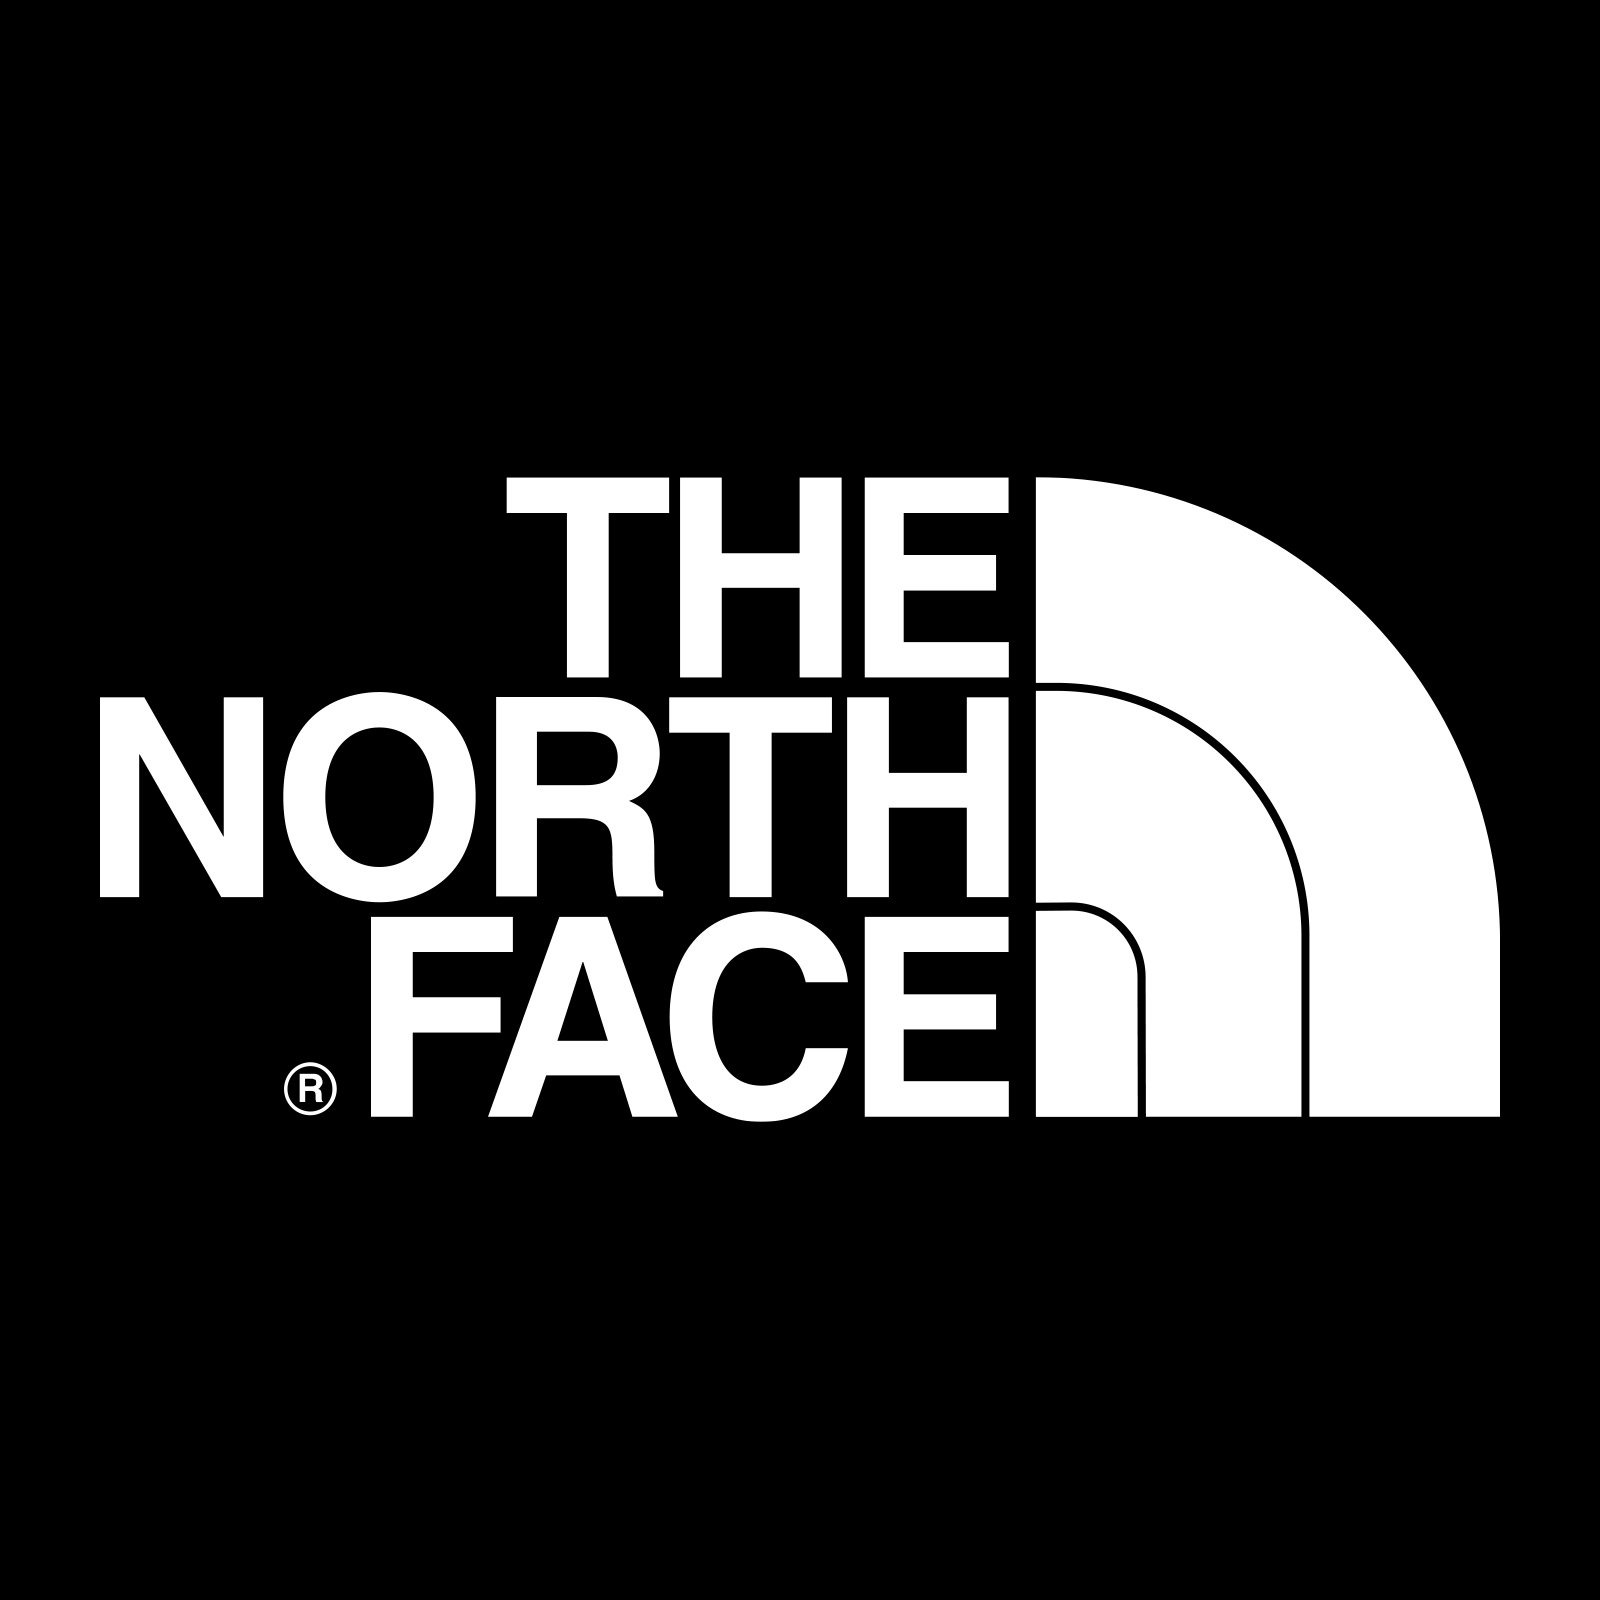 Up to 35% OFF The North Face with CODE 35SELECTS on Moose Limited